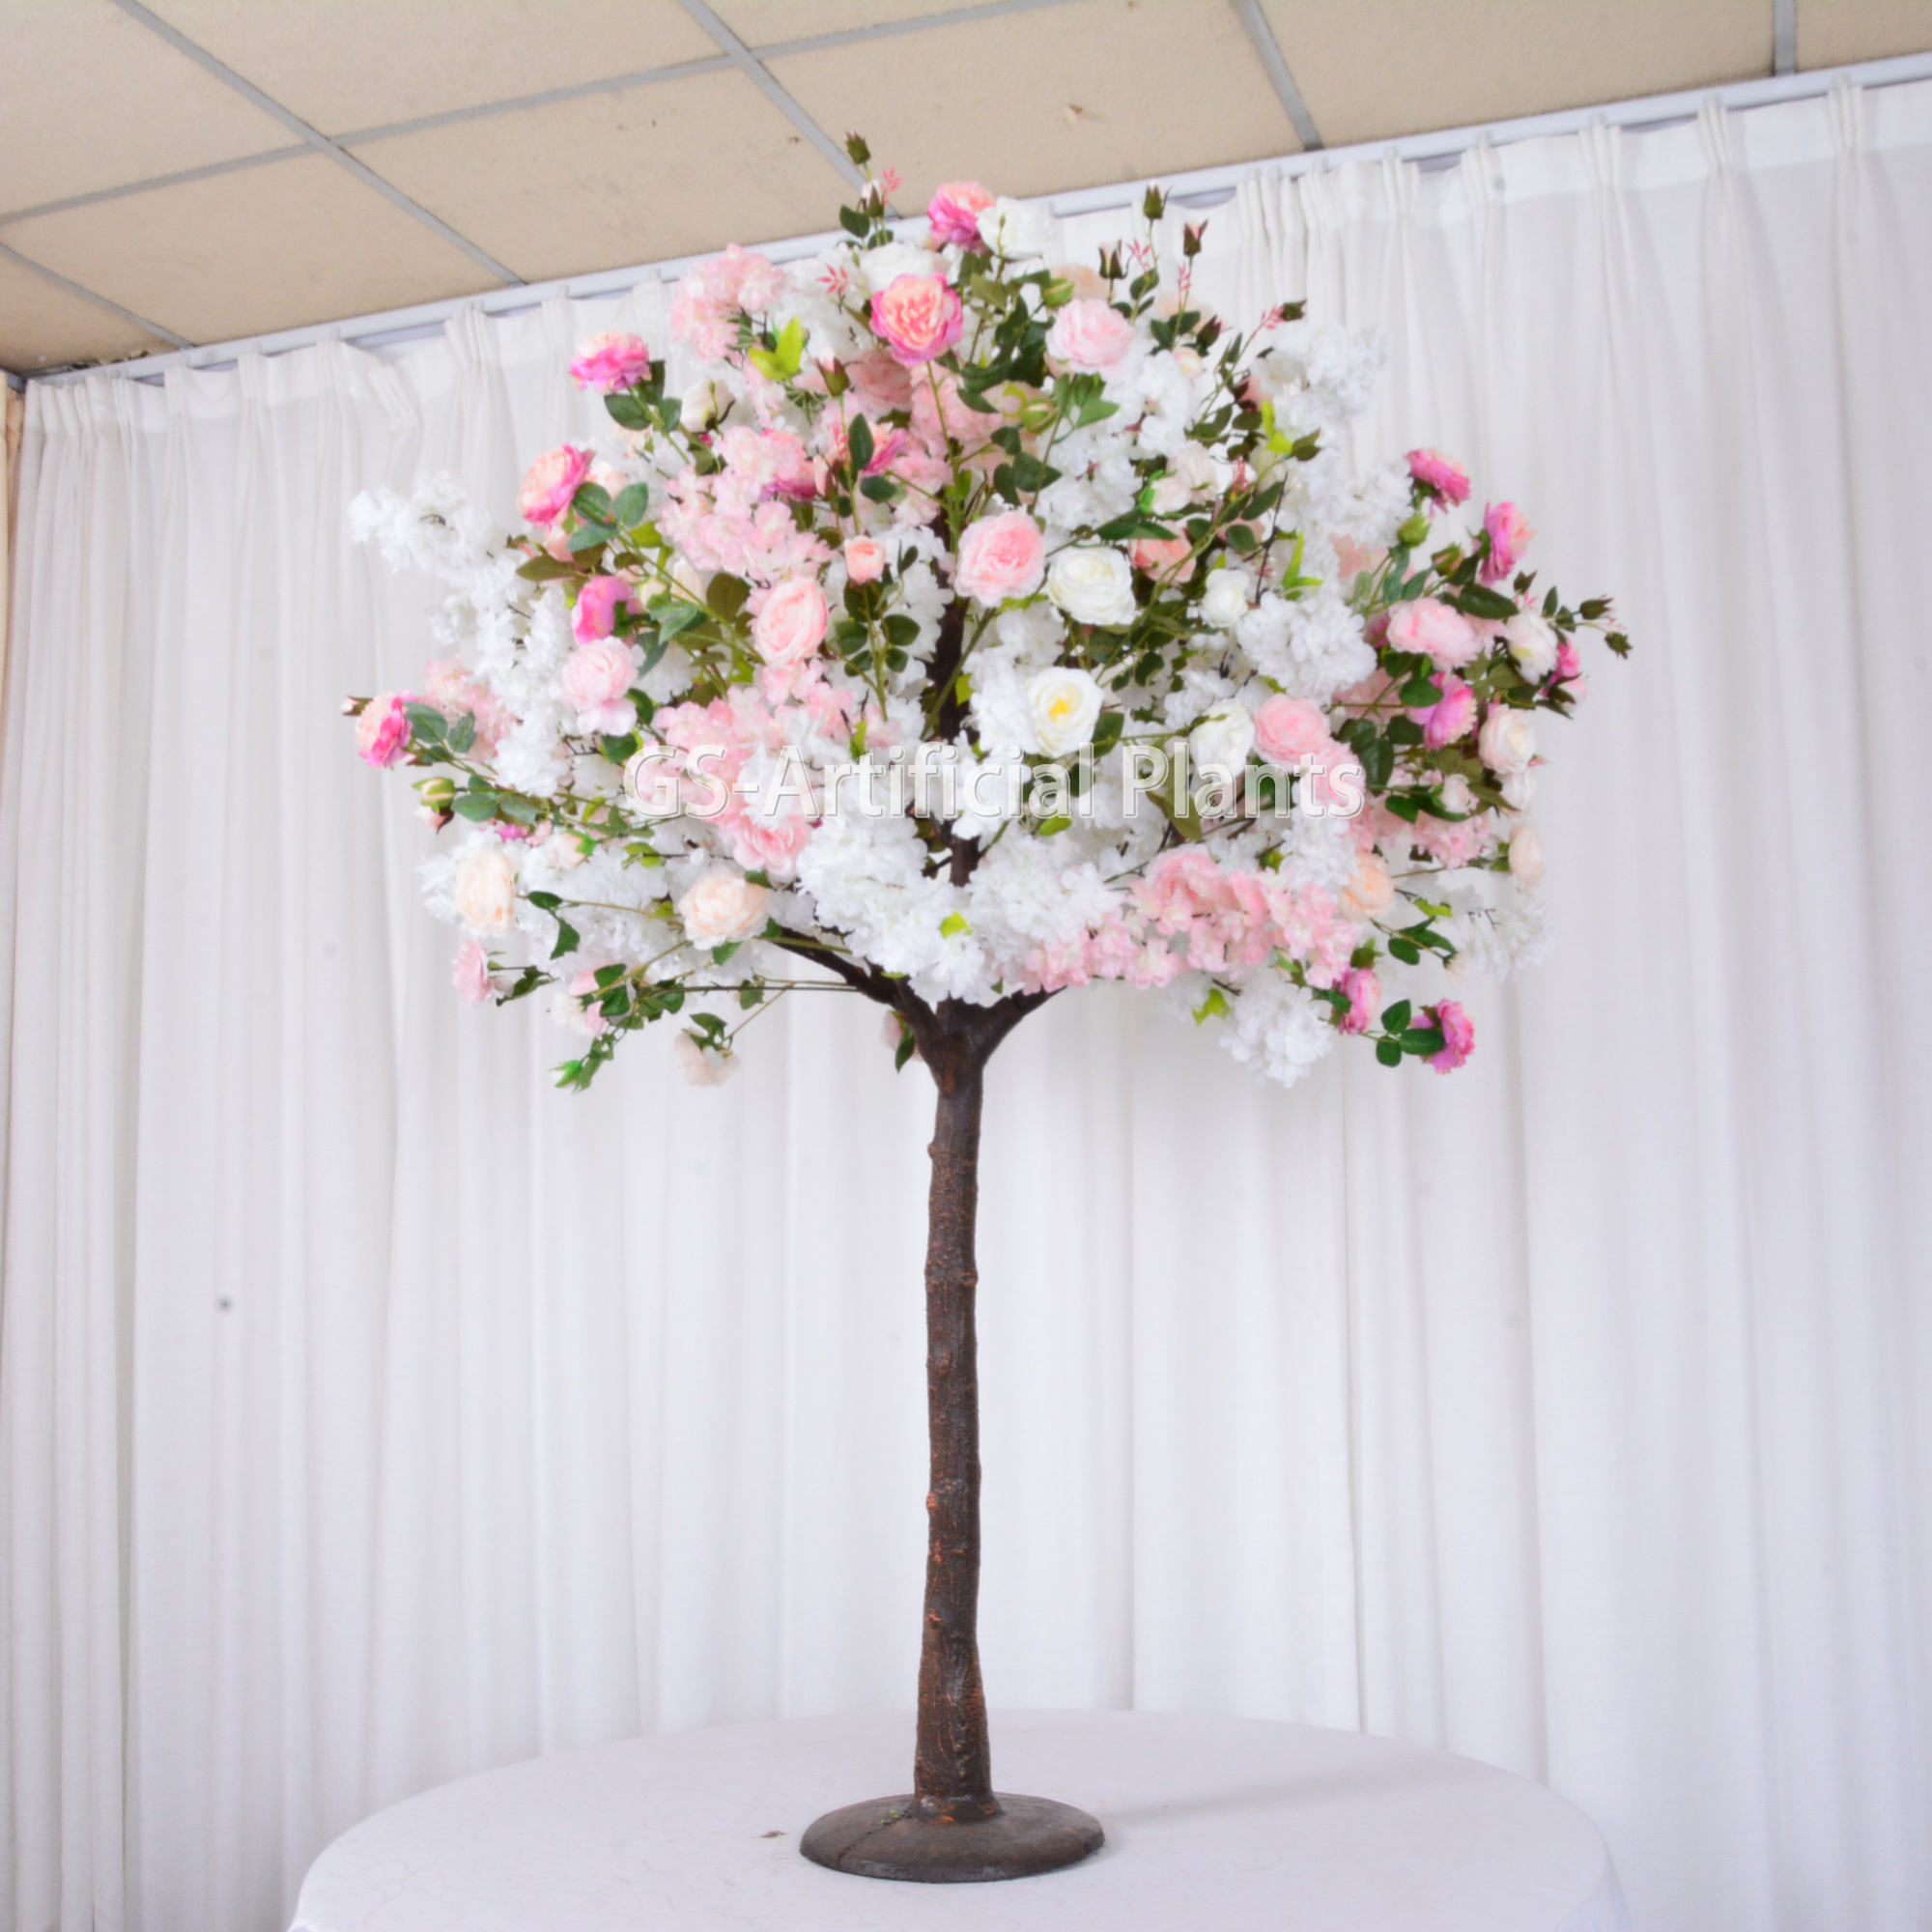 customized Artificial rose tree mixed cherry blossom flowers Wedding Tree centerpiece 